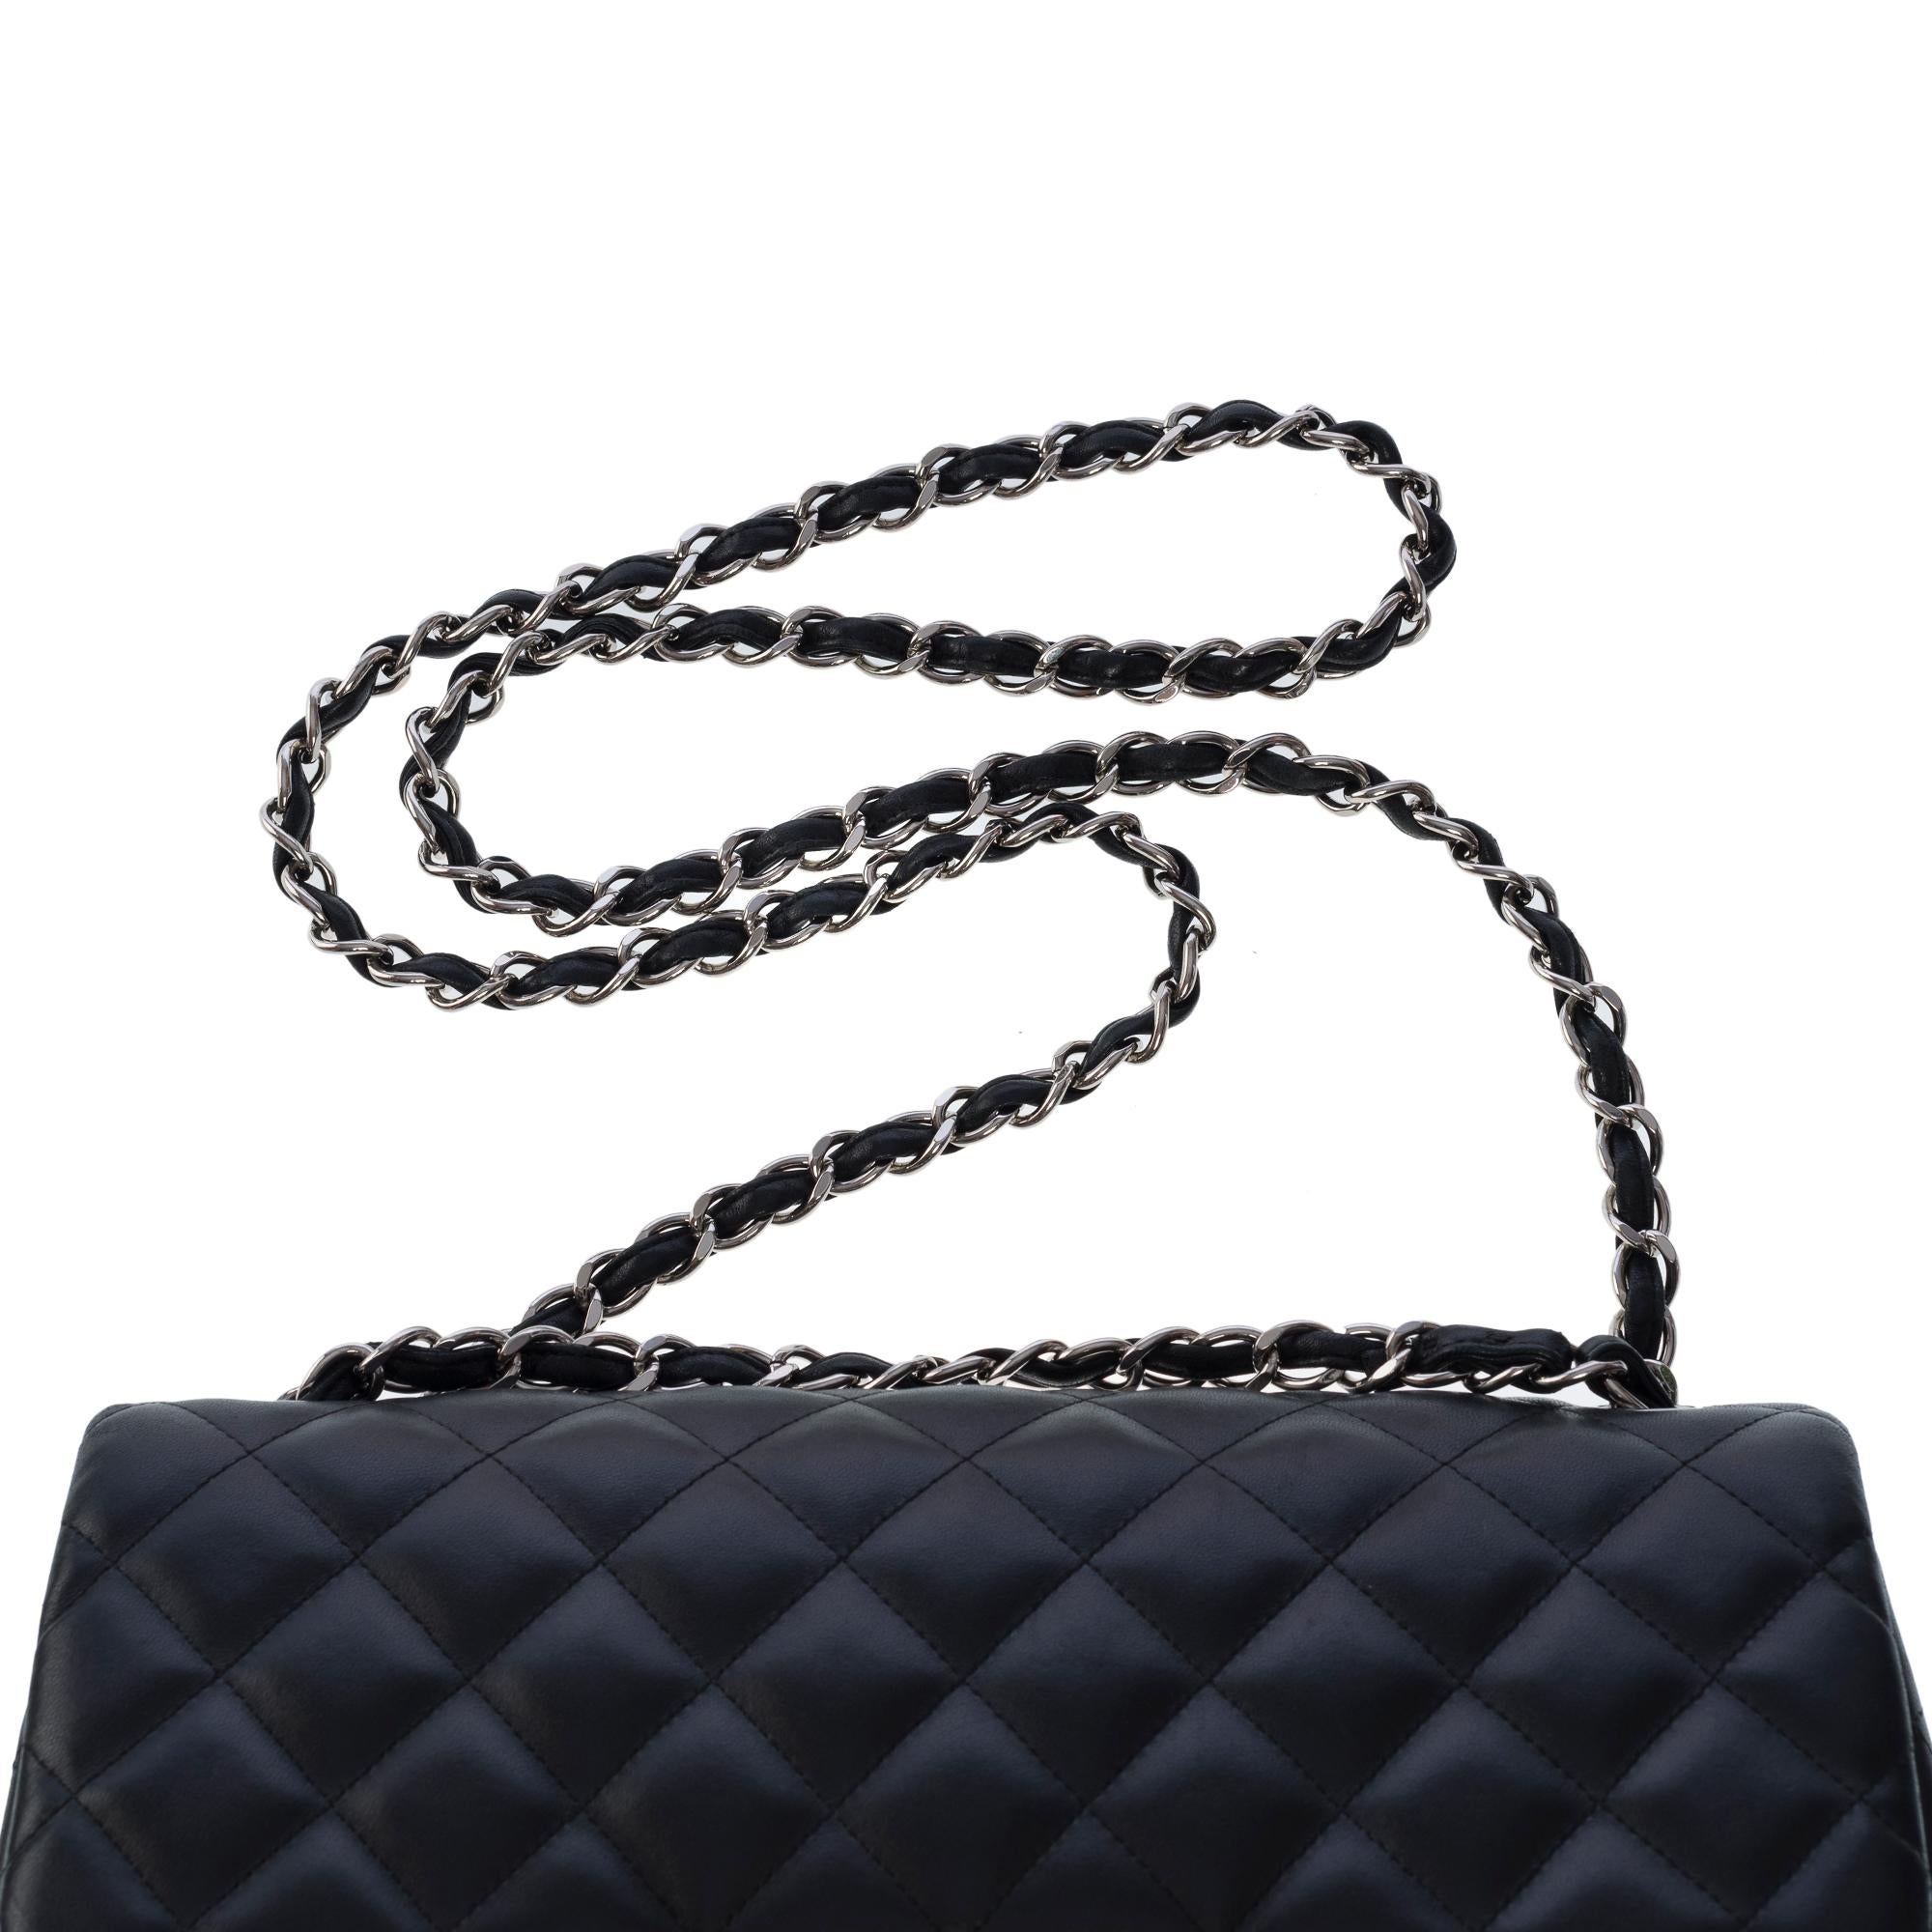 Chanel Timeless Jumbo double flap shoulder bag in black quilted lambskin , SHW 5